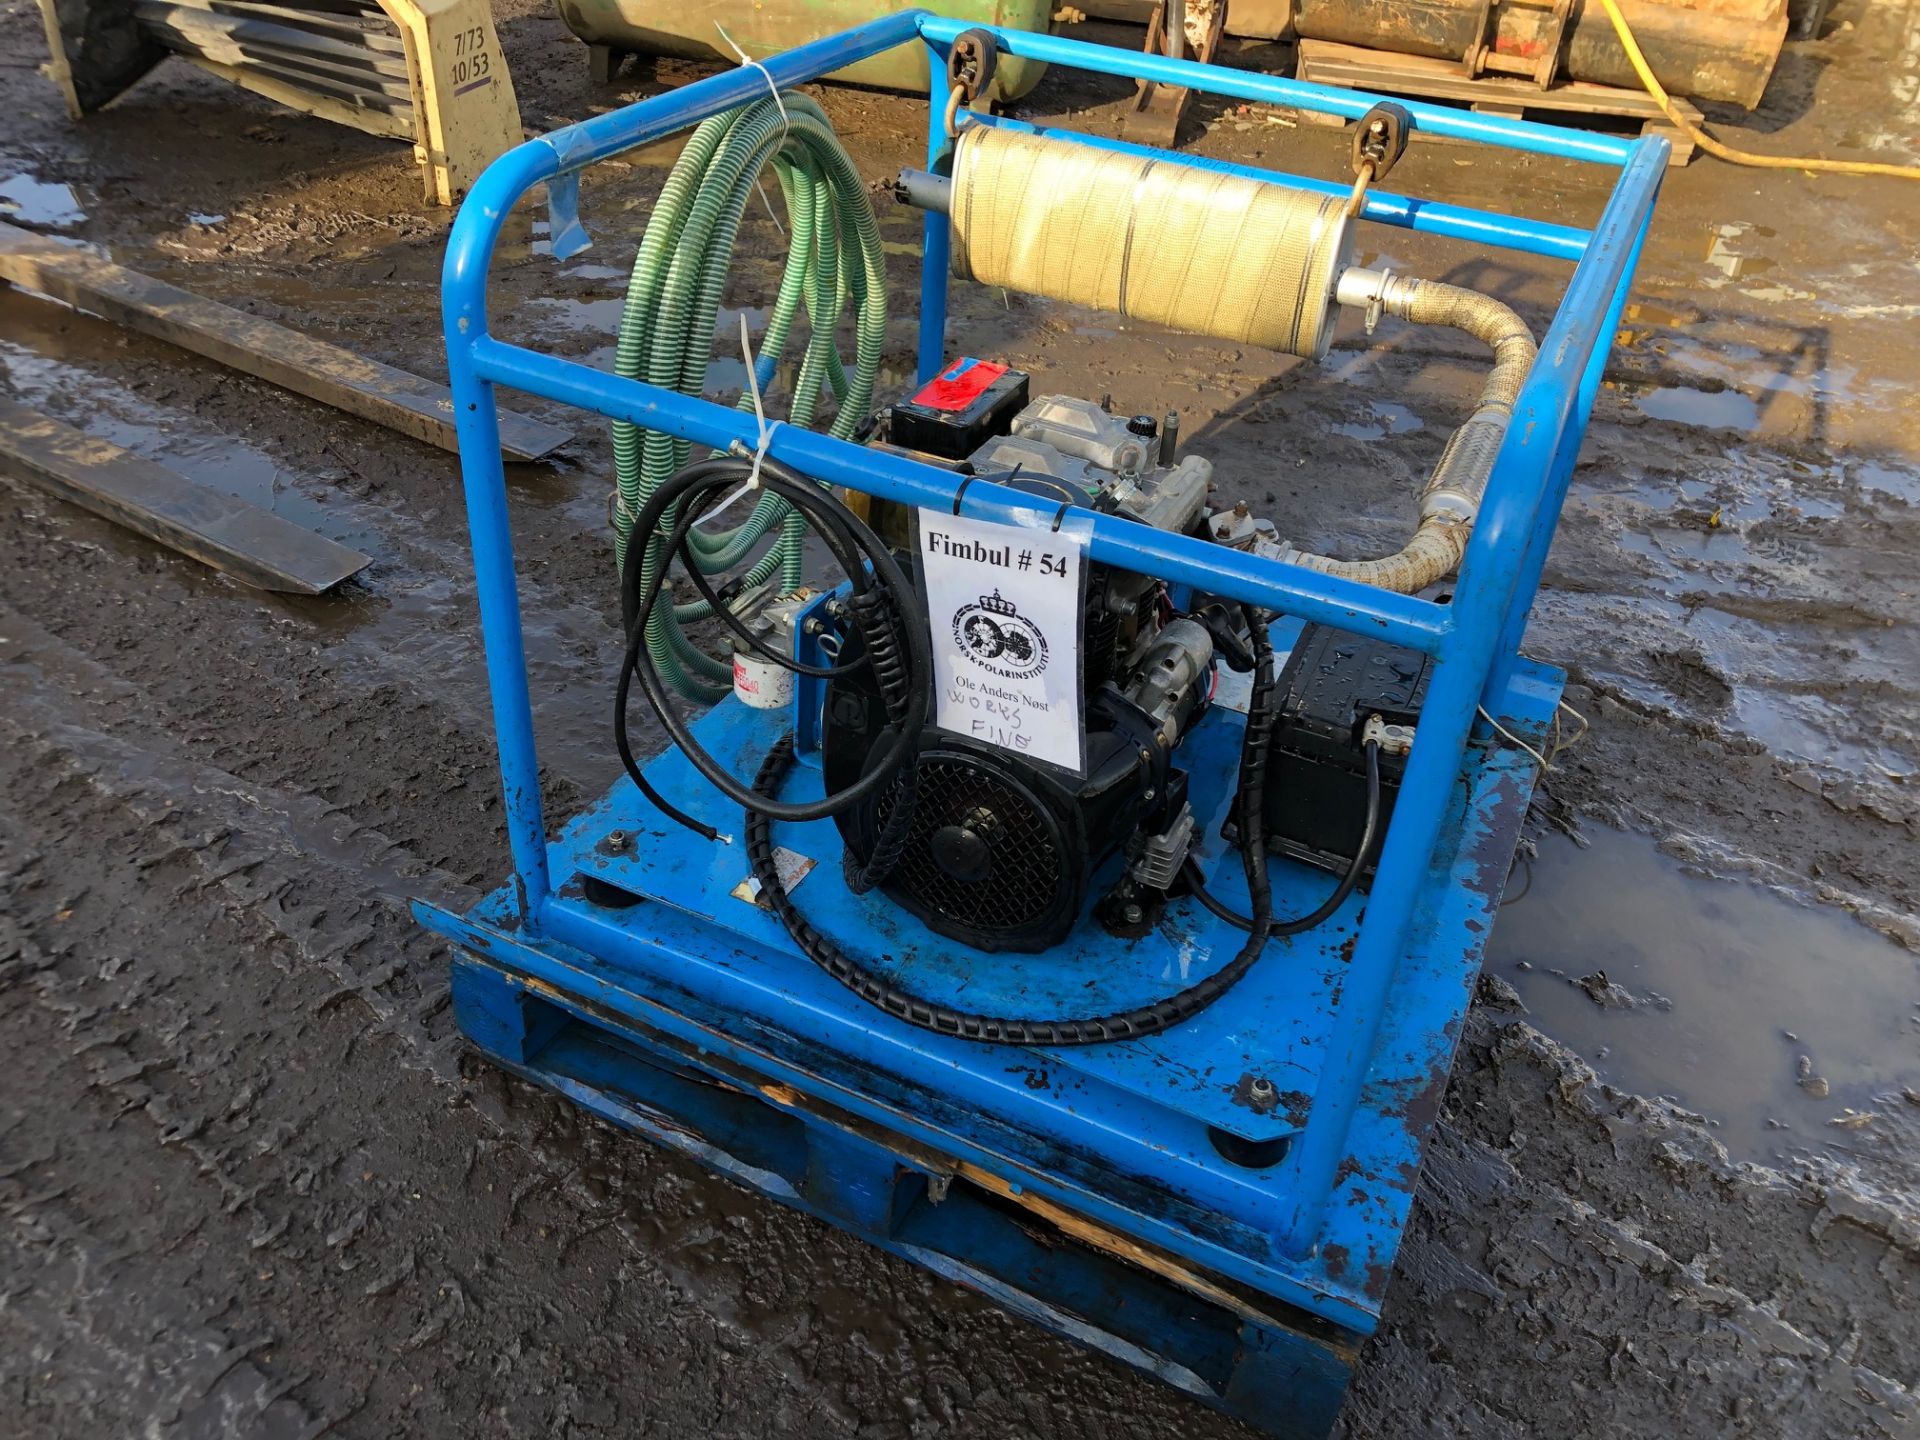 RUGGERINI 2 CYLINDER ELECTRIC START DIESEL JET WASH, CAT1051 PUMP (2200 PSI, 10GPM) VERY LITTLE USE - Image 5 of 6